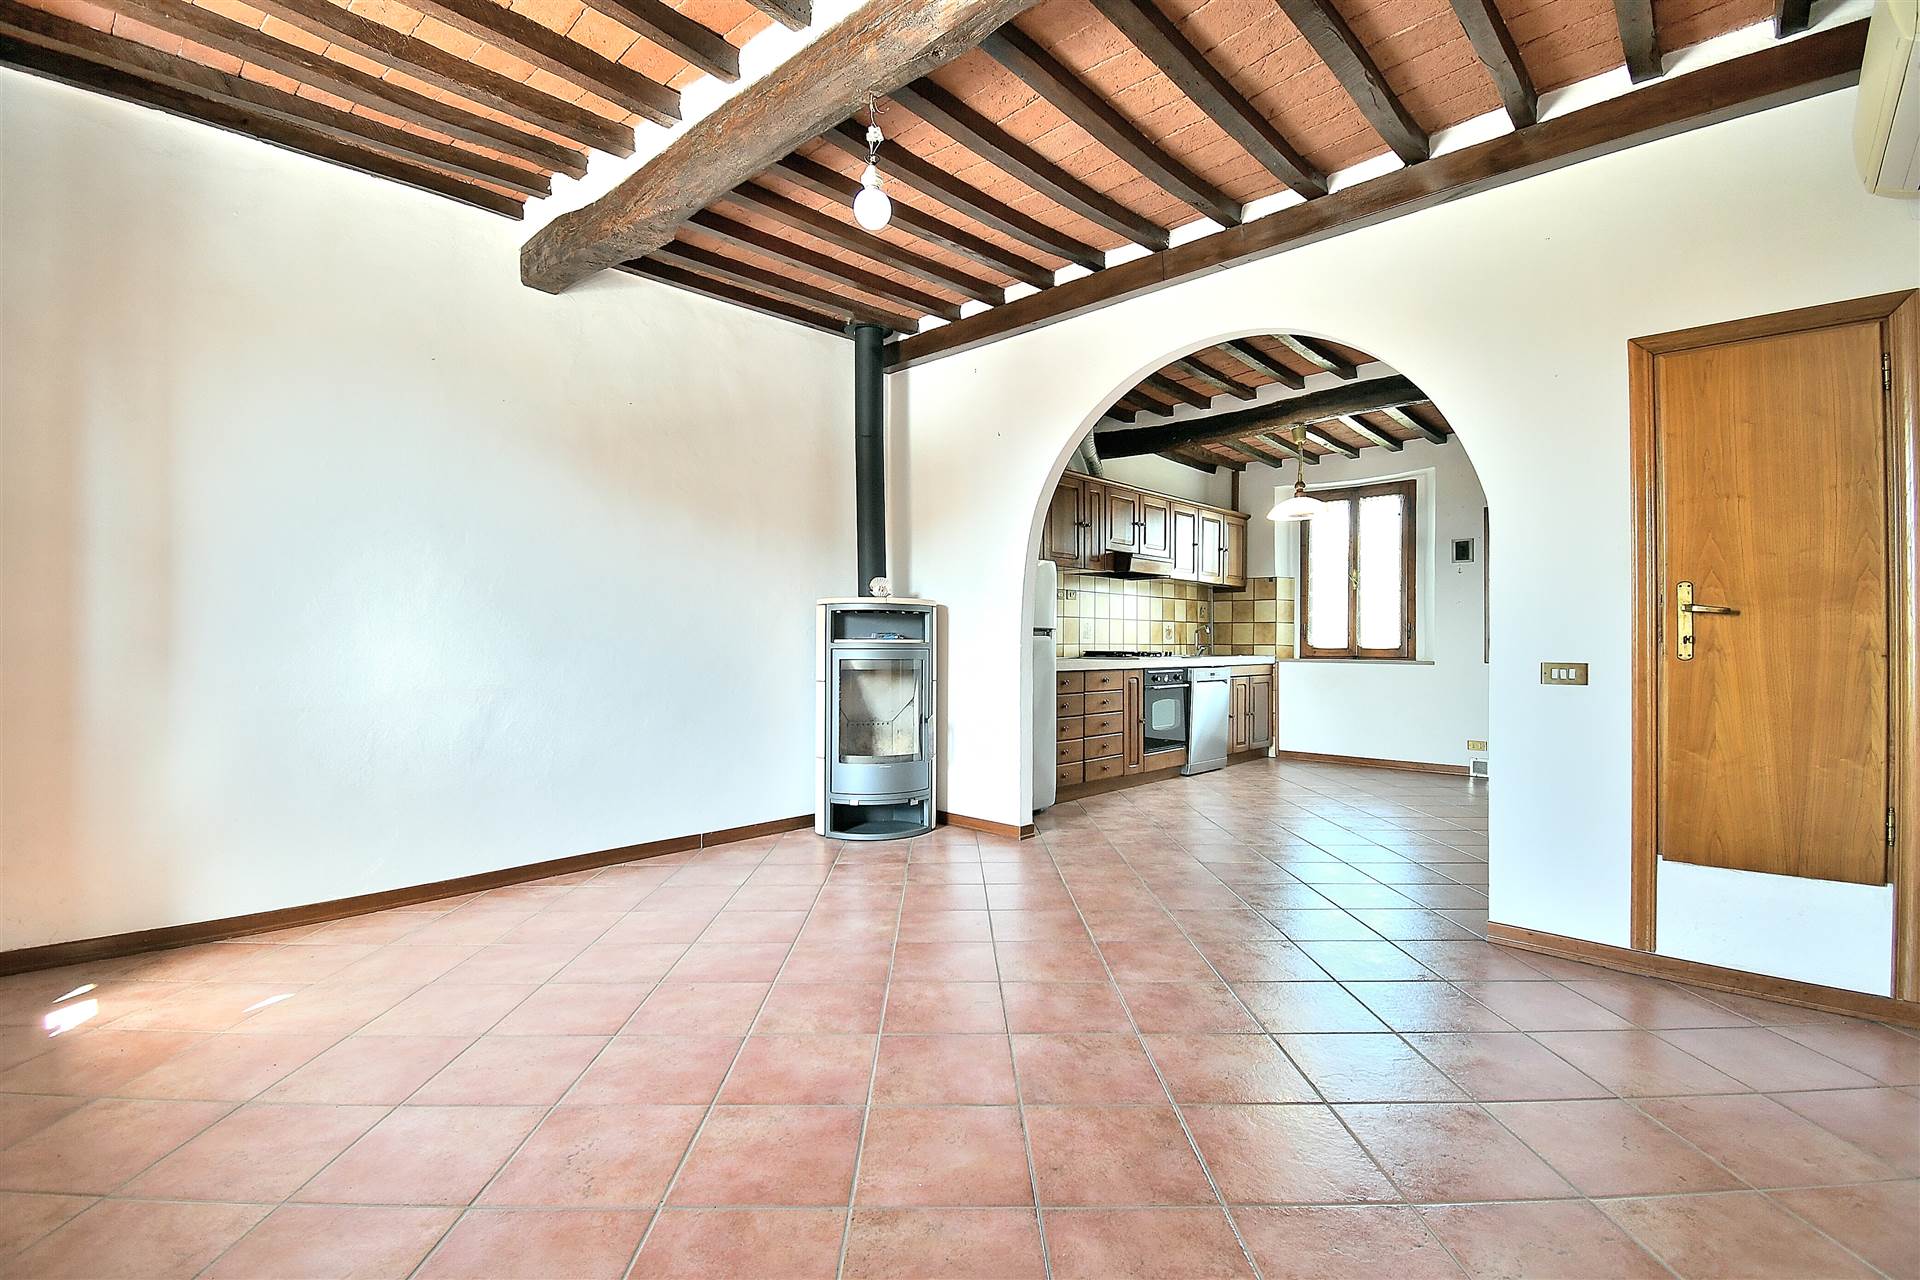 MONTERIGGIONI, Apartment for sale of 78 Sq. mt., Good condition, Heating Individual heating system, Energetic class: G, Epi: 175 kwh/m2 year, placed 